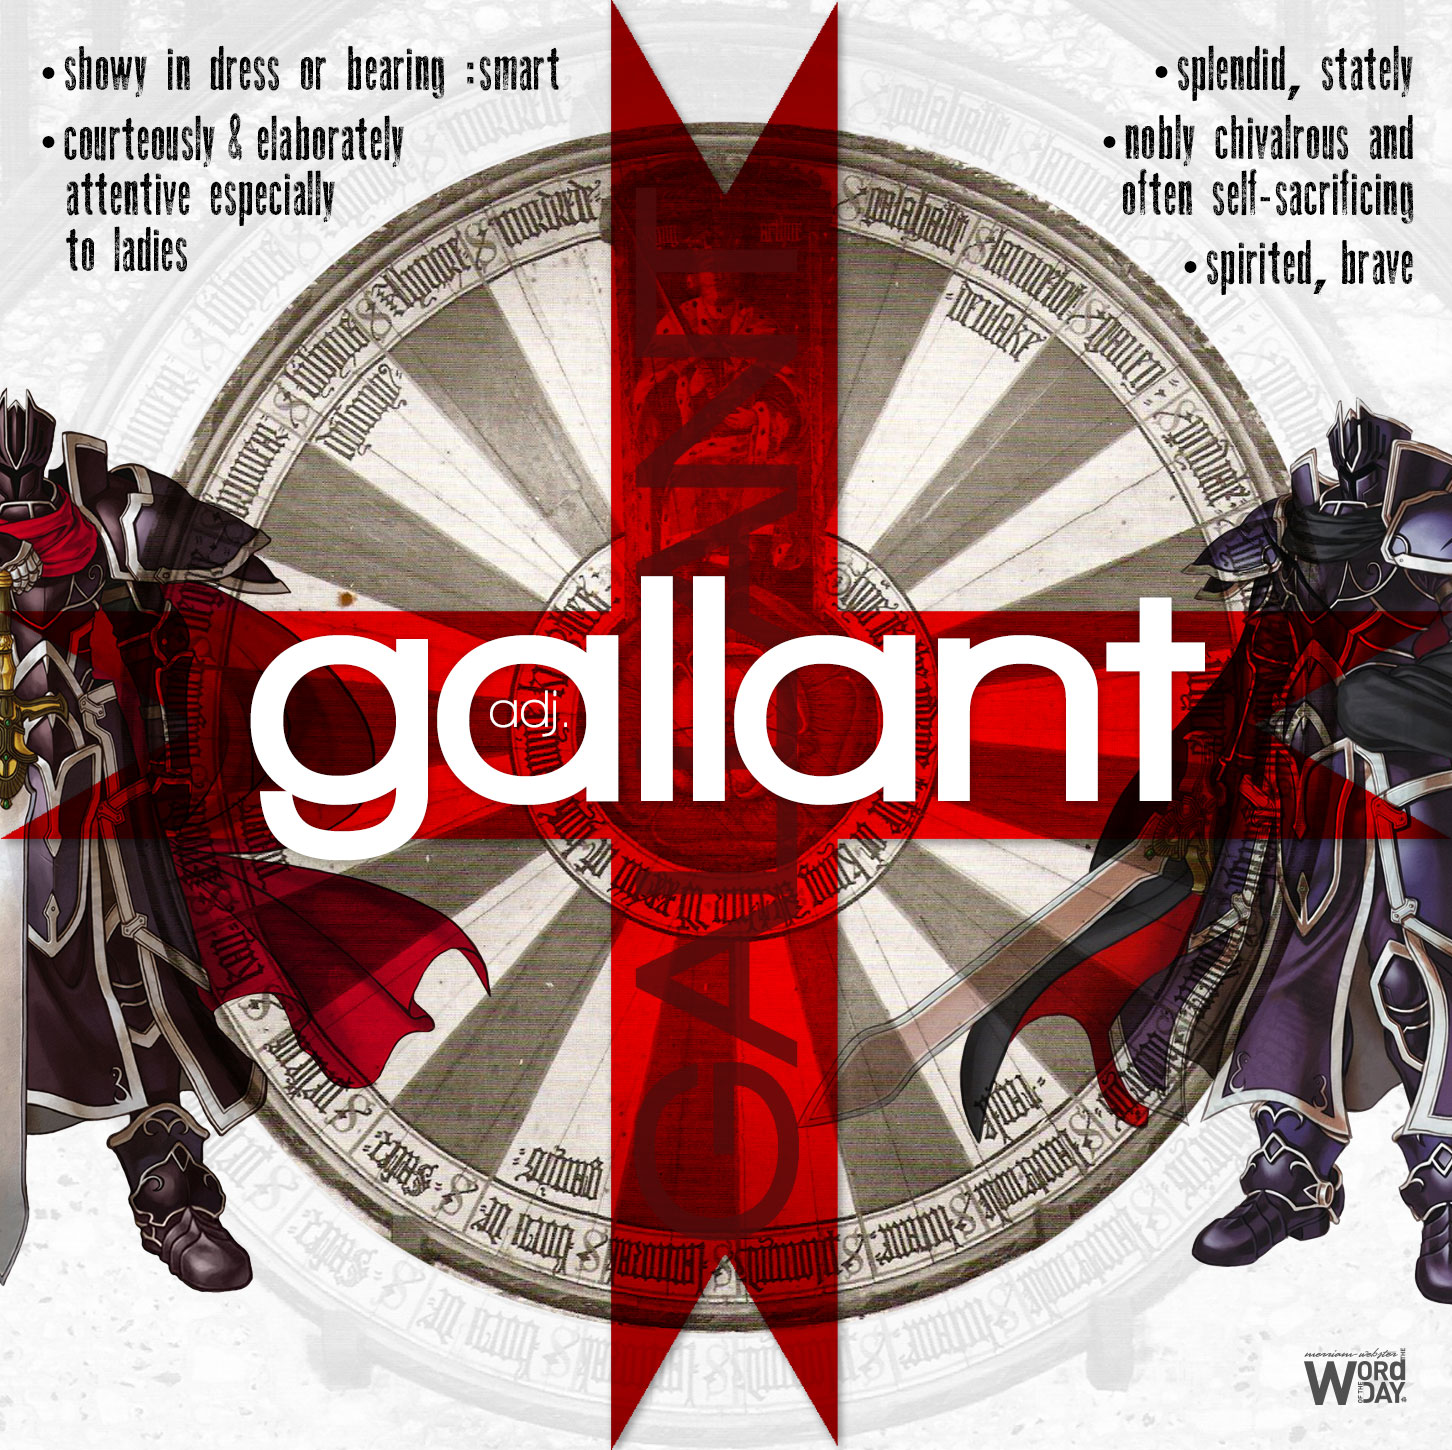 Galant: showing in dress or bearing. splendid, stately, noble. courteous especially to ladies